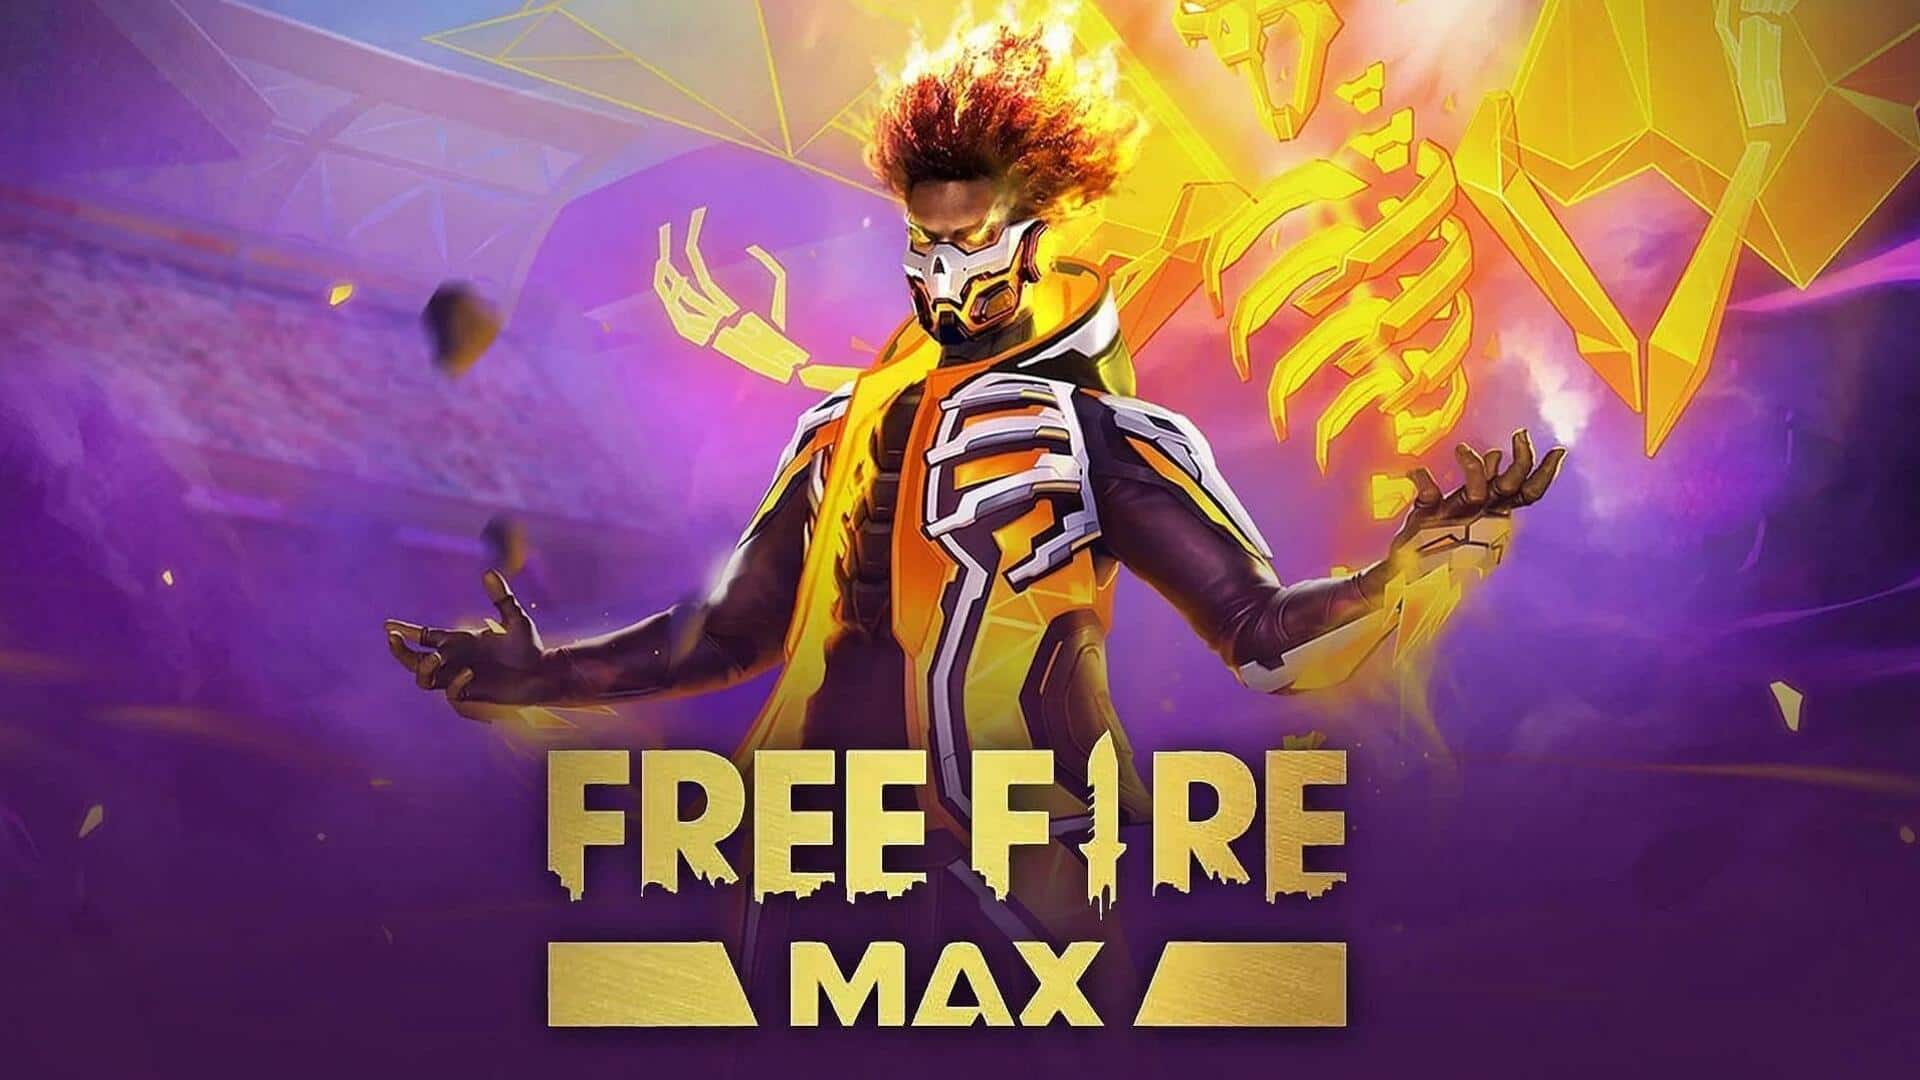 Garena Free Fire MAX's August 6 codes: How to redeem